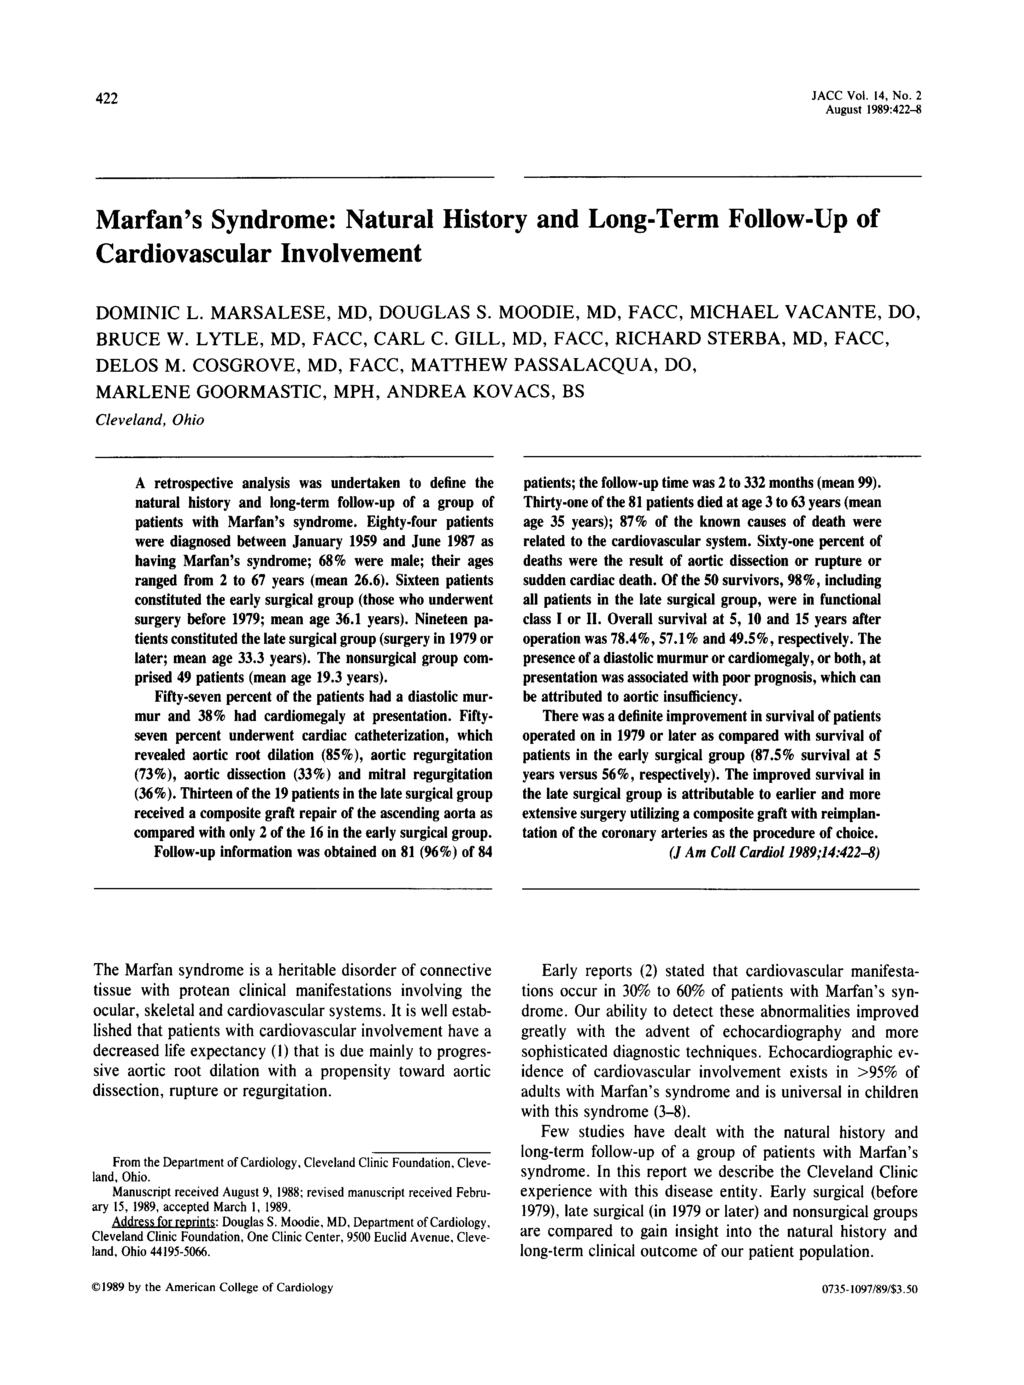 4 JACC Vol. 14, No. August 1989 :4-8 Marfan's Syndrome : Natural History and Long-Term Follow-Up of Cardiovascular Involvement DOMINIC L. MARSALESE, MD, DOUGLAS S.